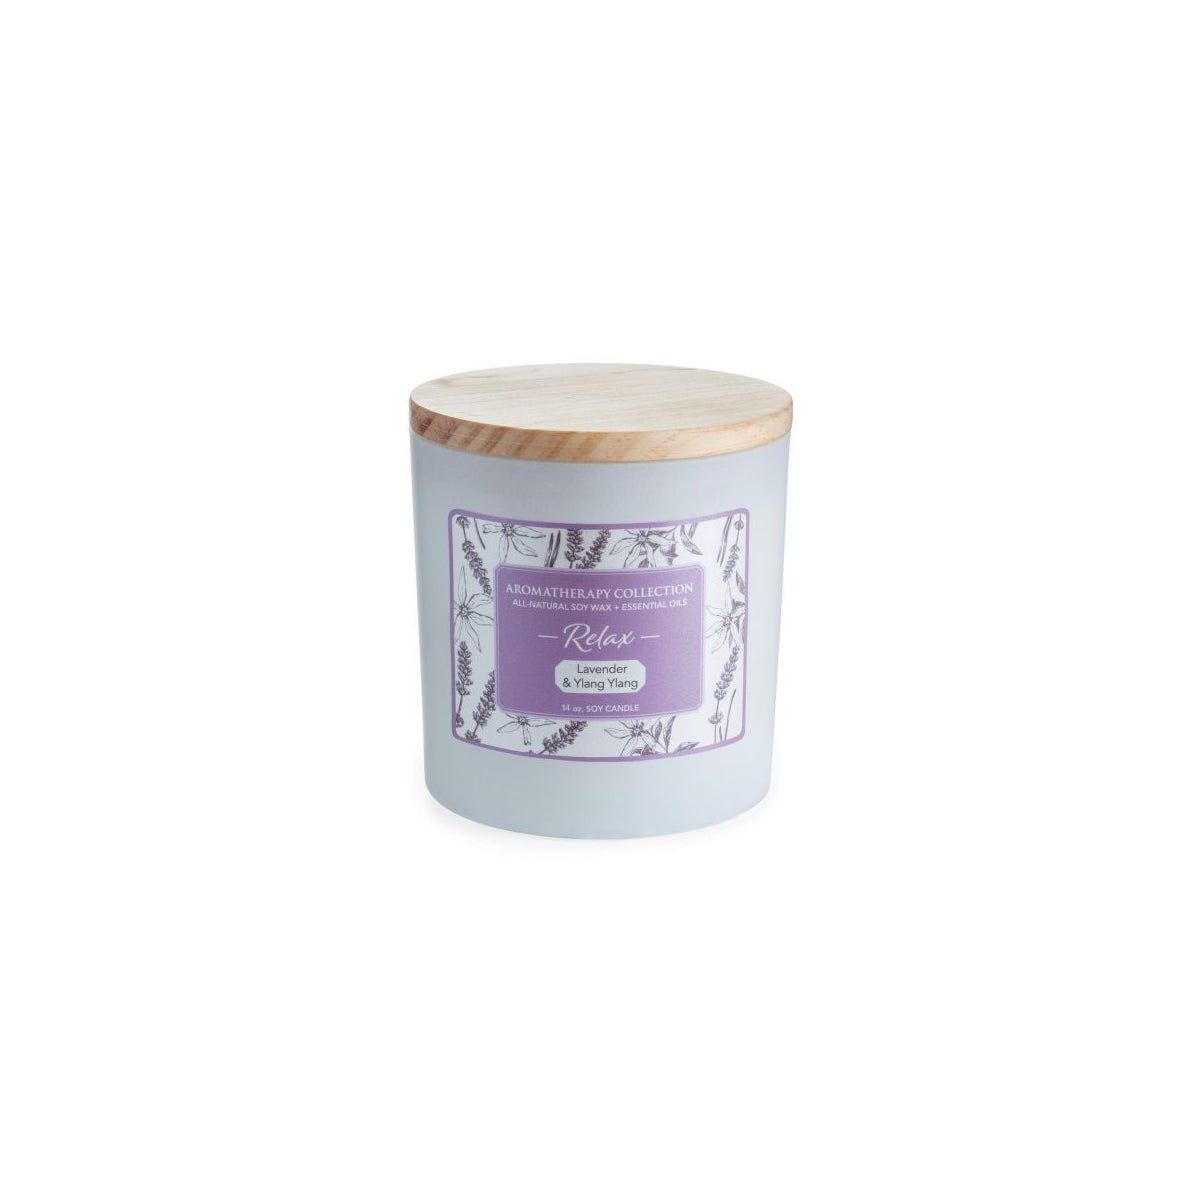 Aromatherapy Candle 14 oz - Relax